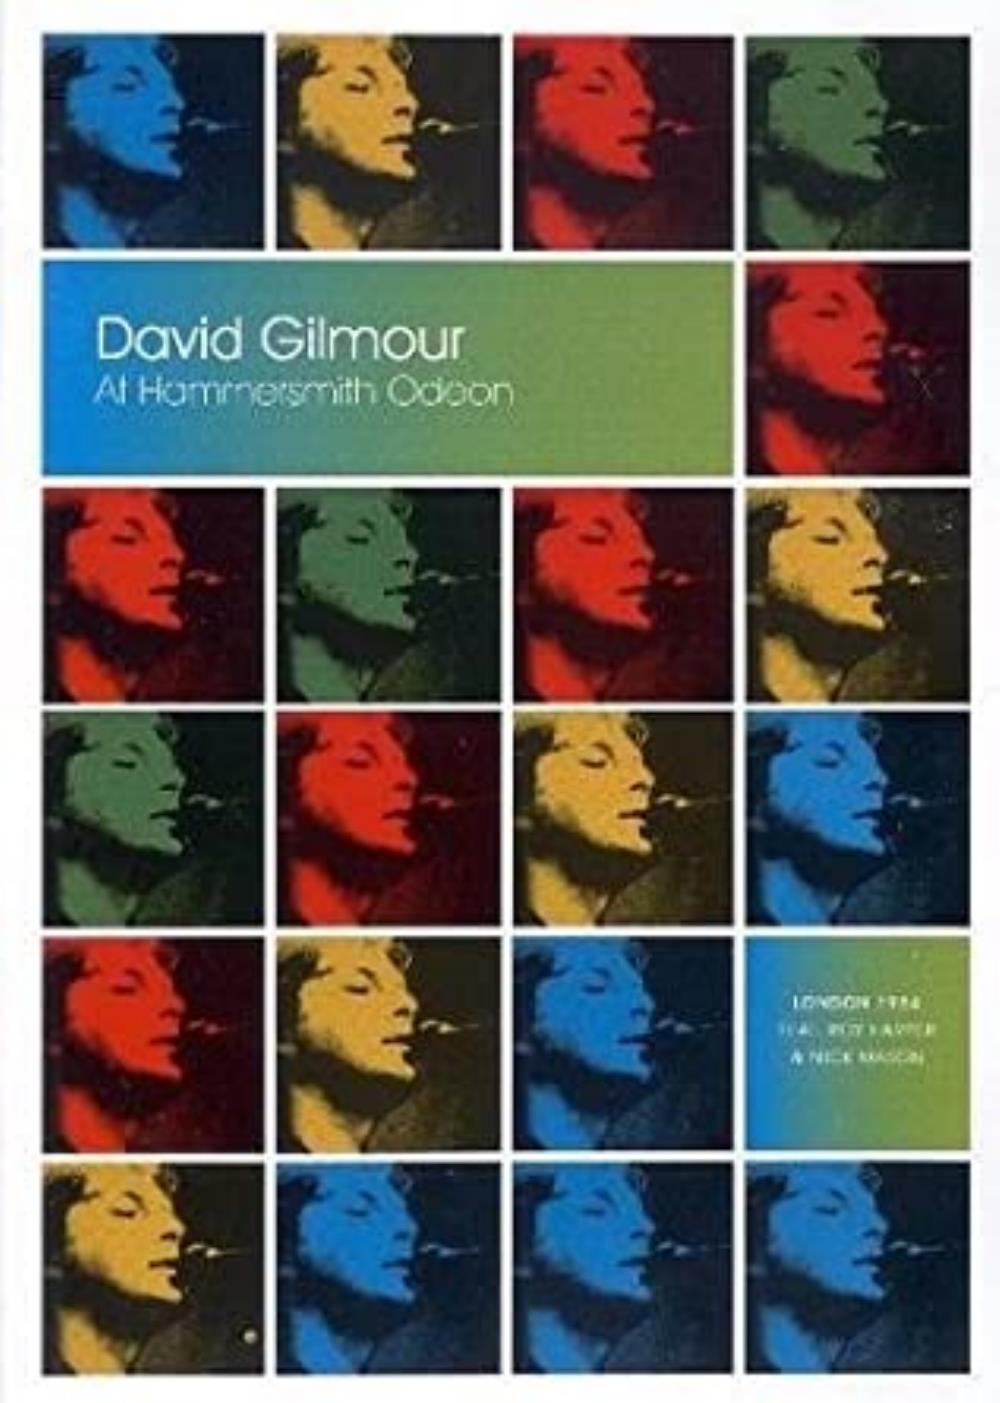  At Hammersmith Odeon by GILMOUR, DAVID album cover